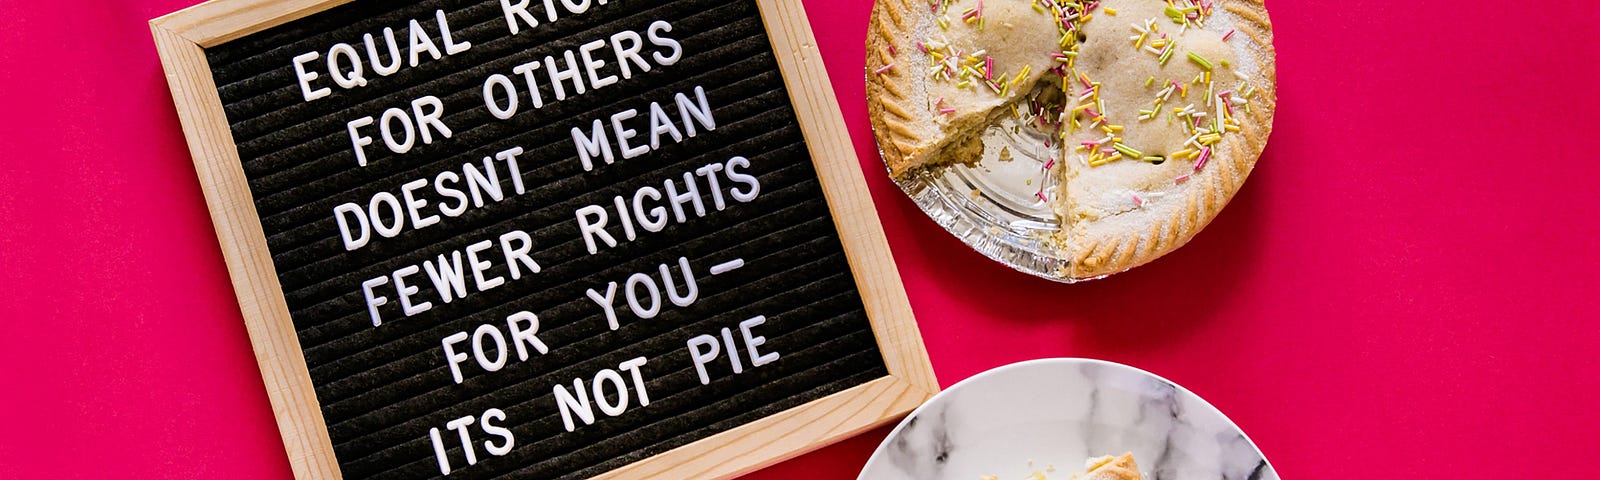 statement stylized in all caps: “Equal rights for others doesn’t mean fewer rights for you — it’s not pie” next to a cup of coffee, a pie with one of its slices served on a plate. all on top of a bright pink background.